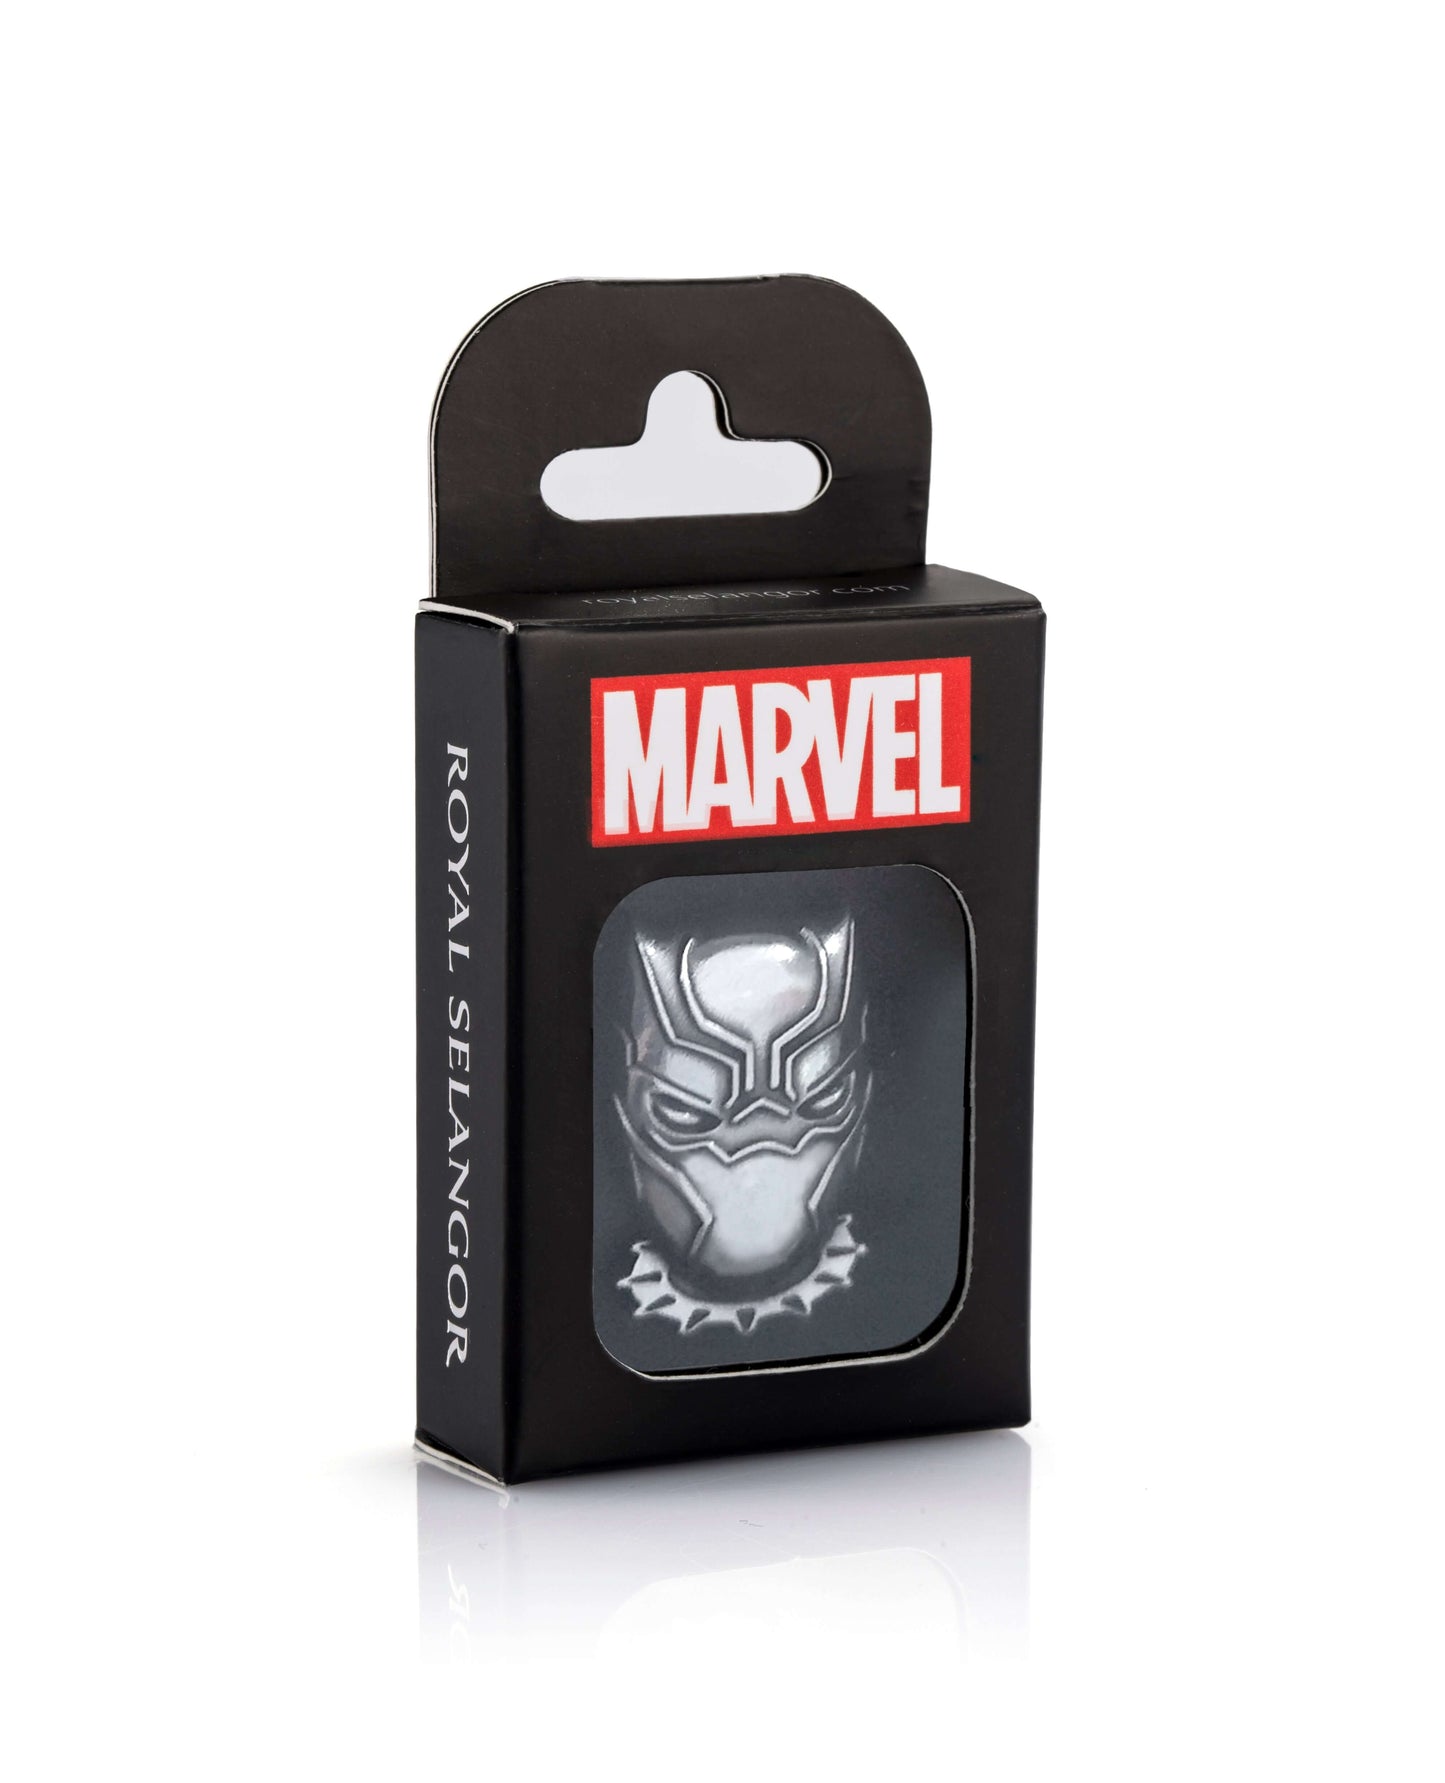 Black Panther Lapel Pin - Marvel Collectible gift